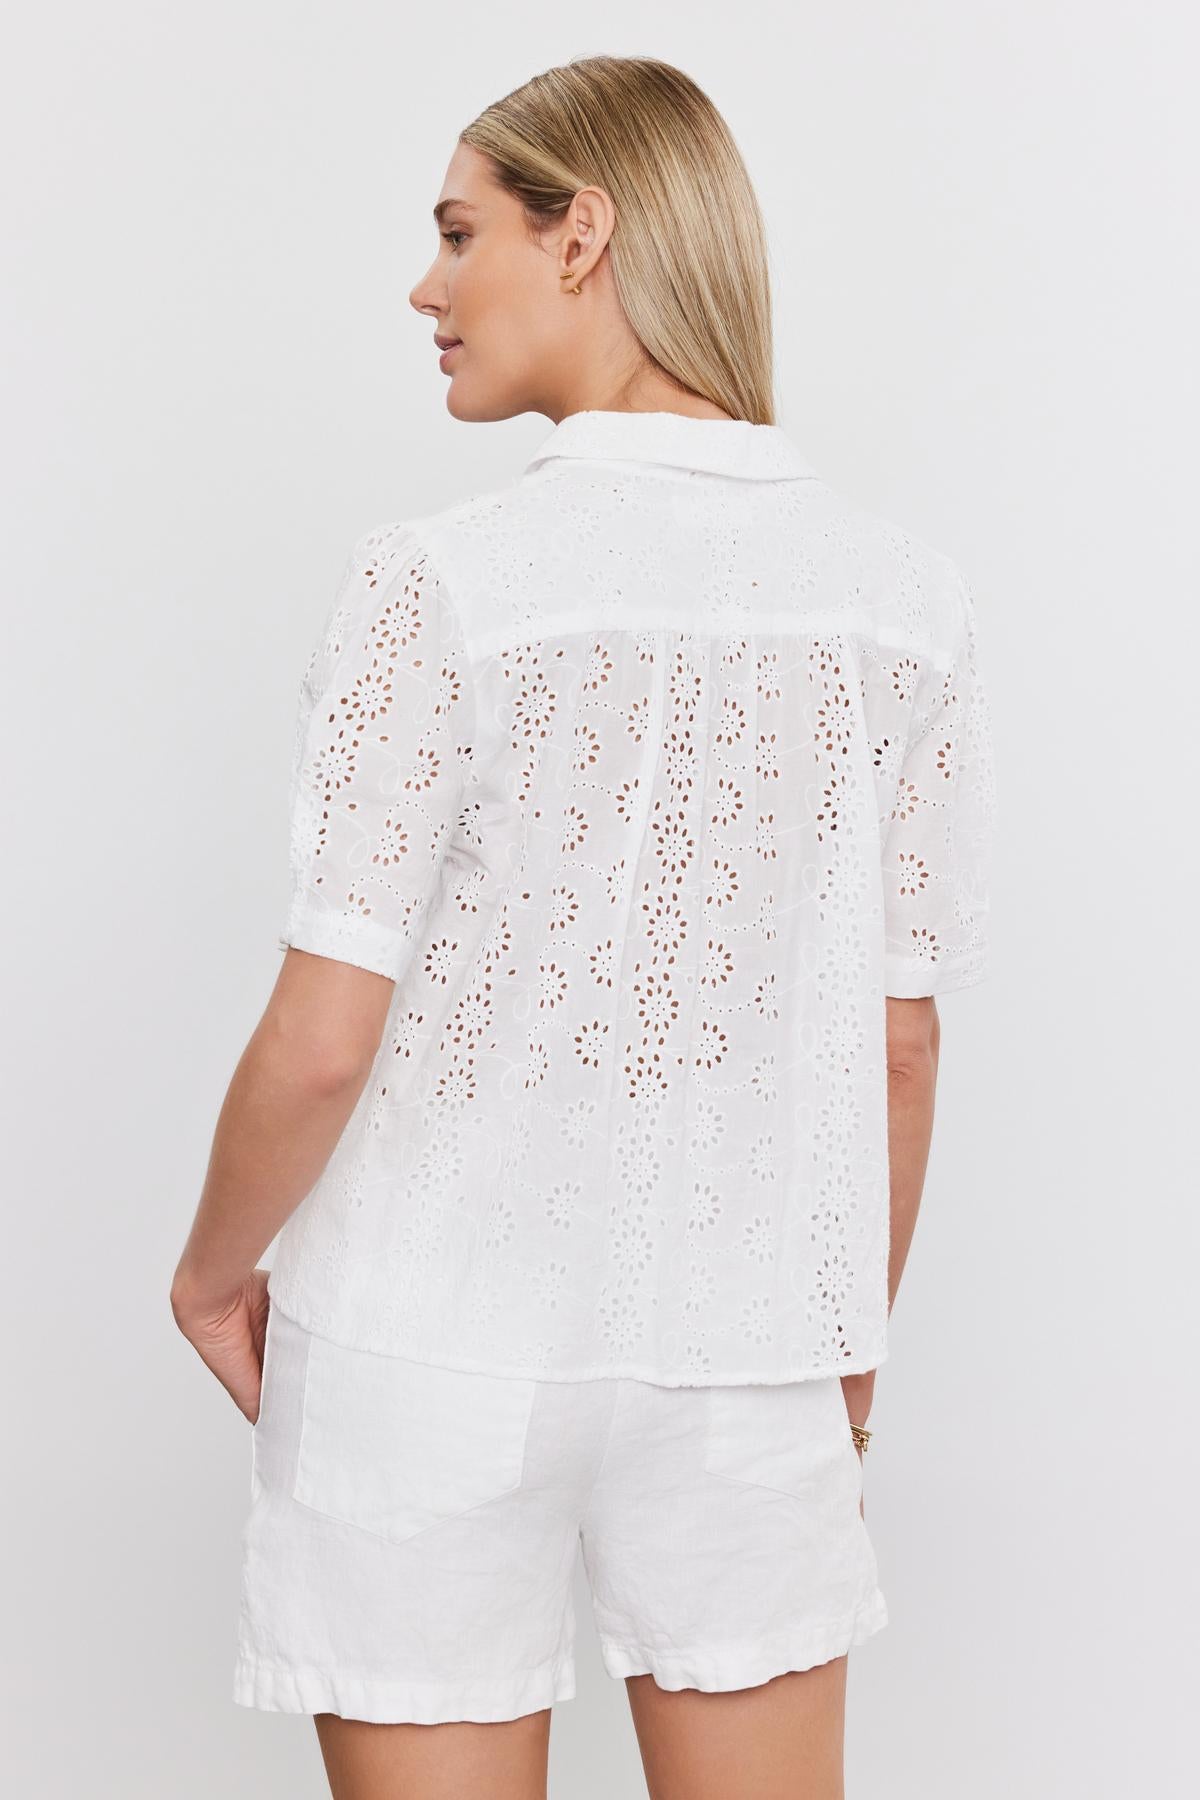 A woman from behind wearing a white, short-sleeved, cotton Olivia blouse with eyelet details and matching shorts, standing against a plain background by Velvet by Graham & Spencer.-36918784917697